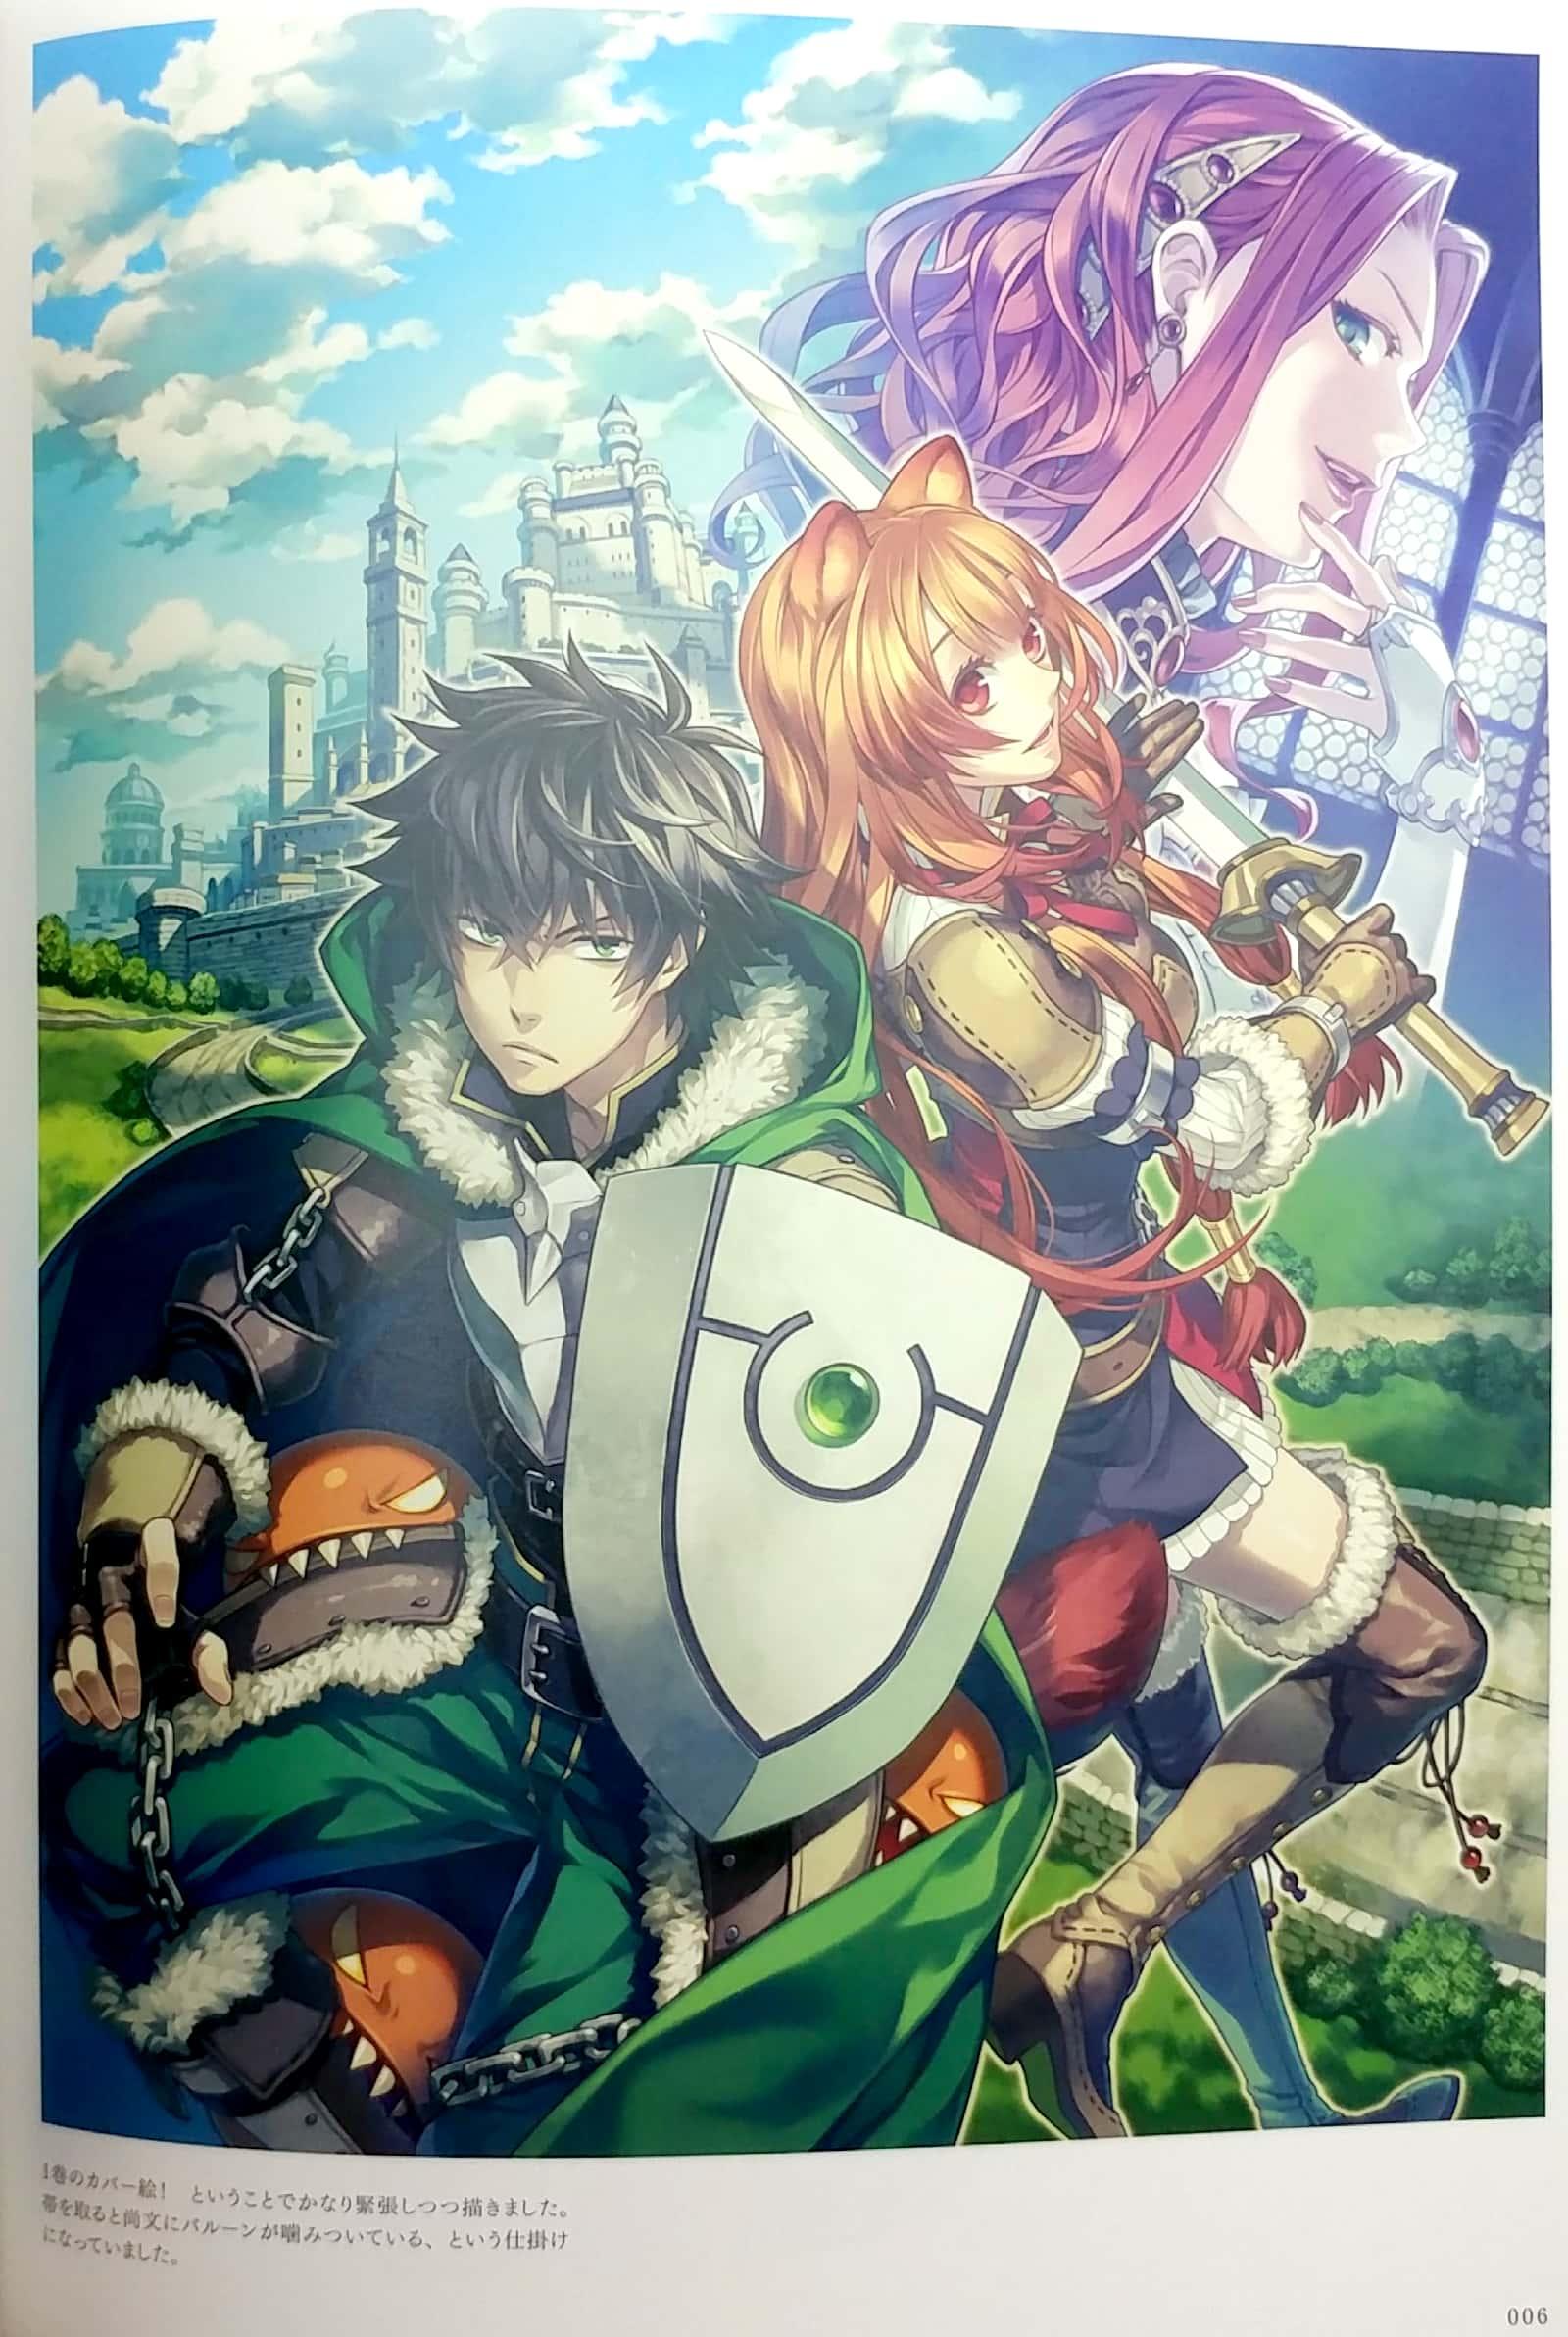 Minami Seira Art Works - The Rising Of The Shield Hero (Japanese Edition)